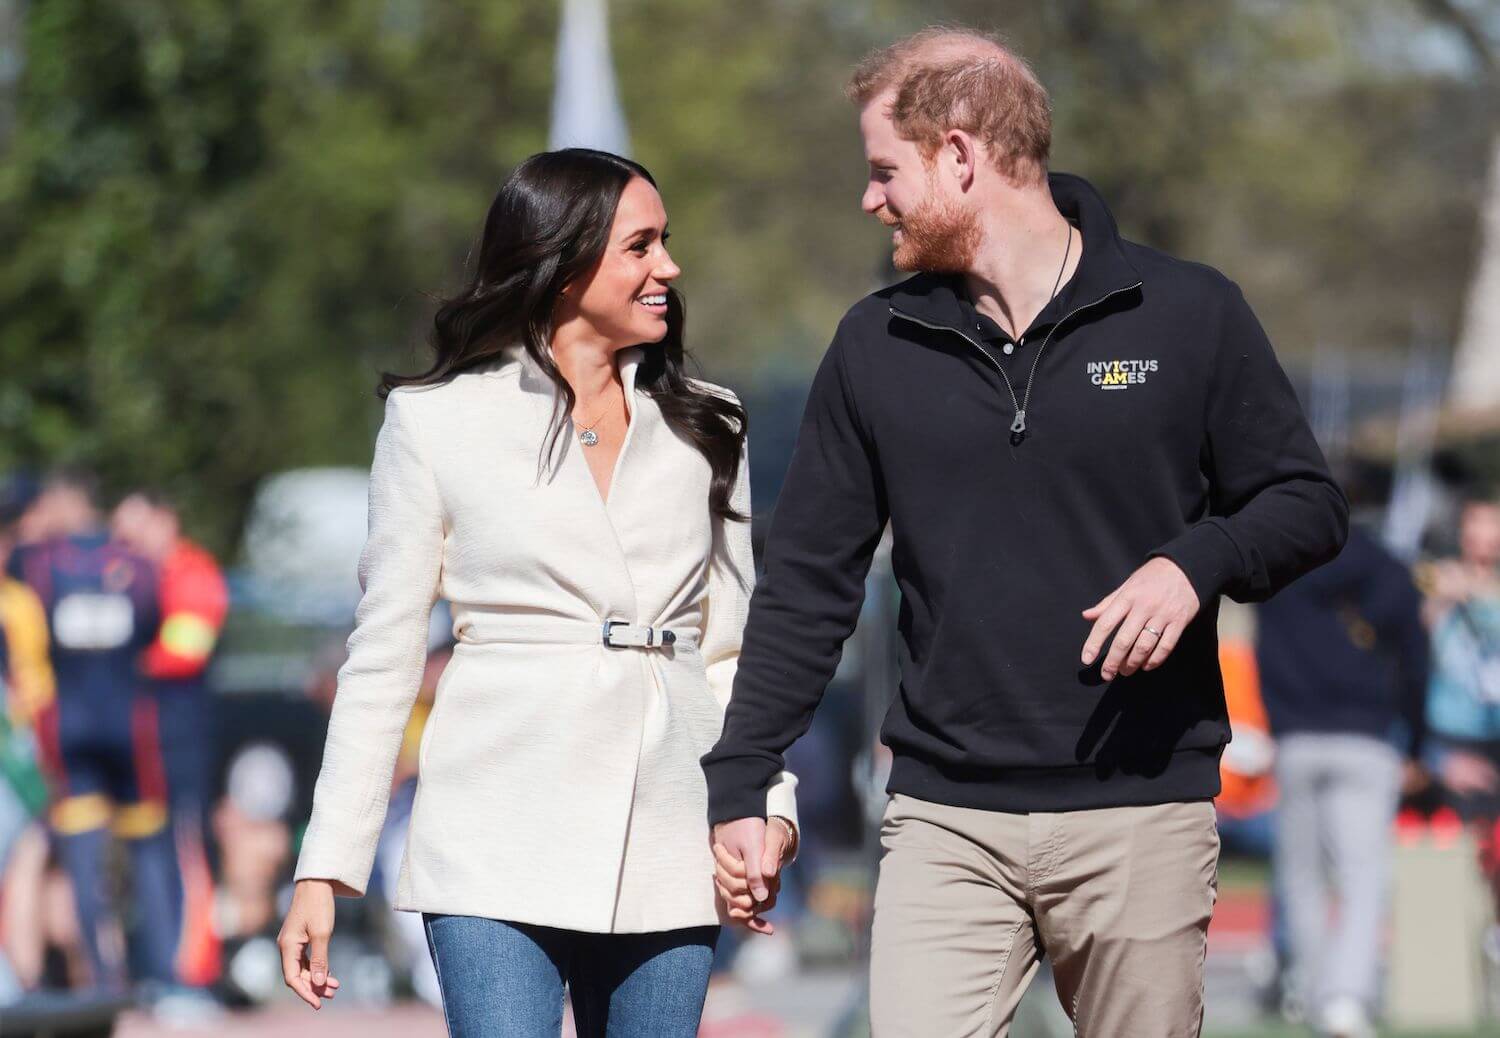 Meghan Markle and Prince Harry look at each other and smile while holding hands